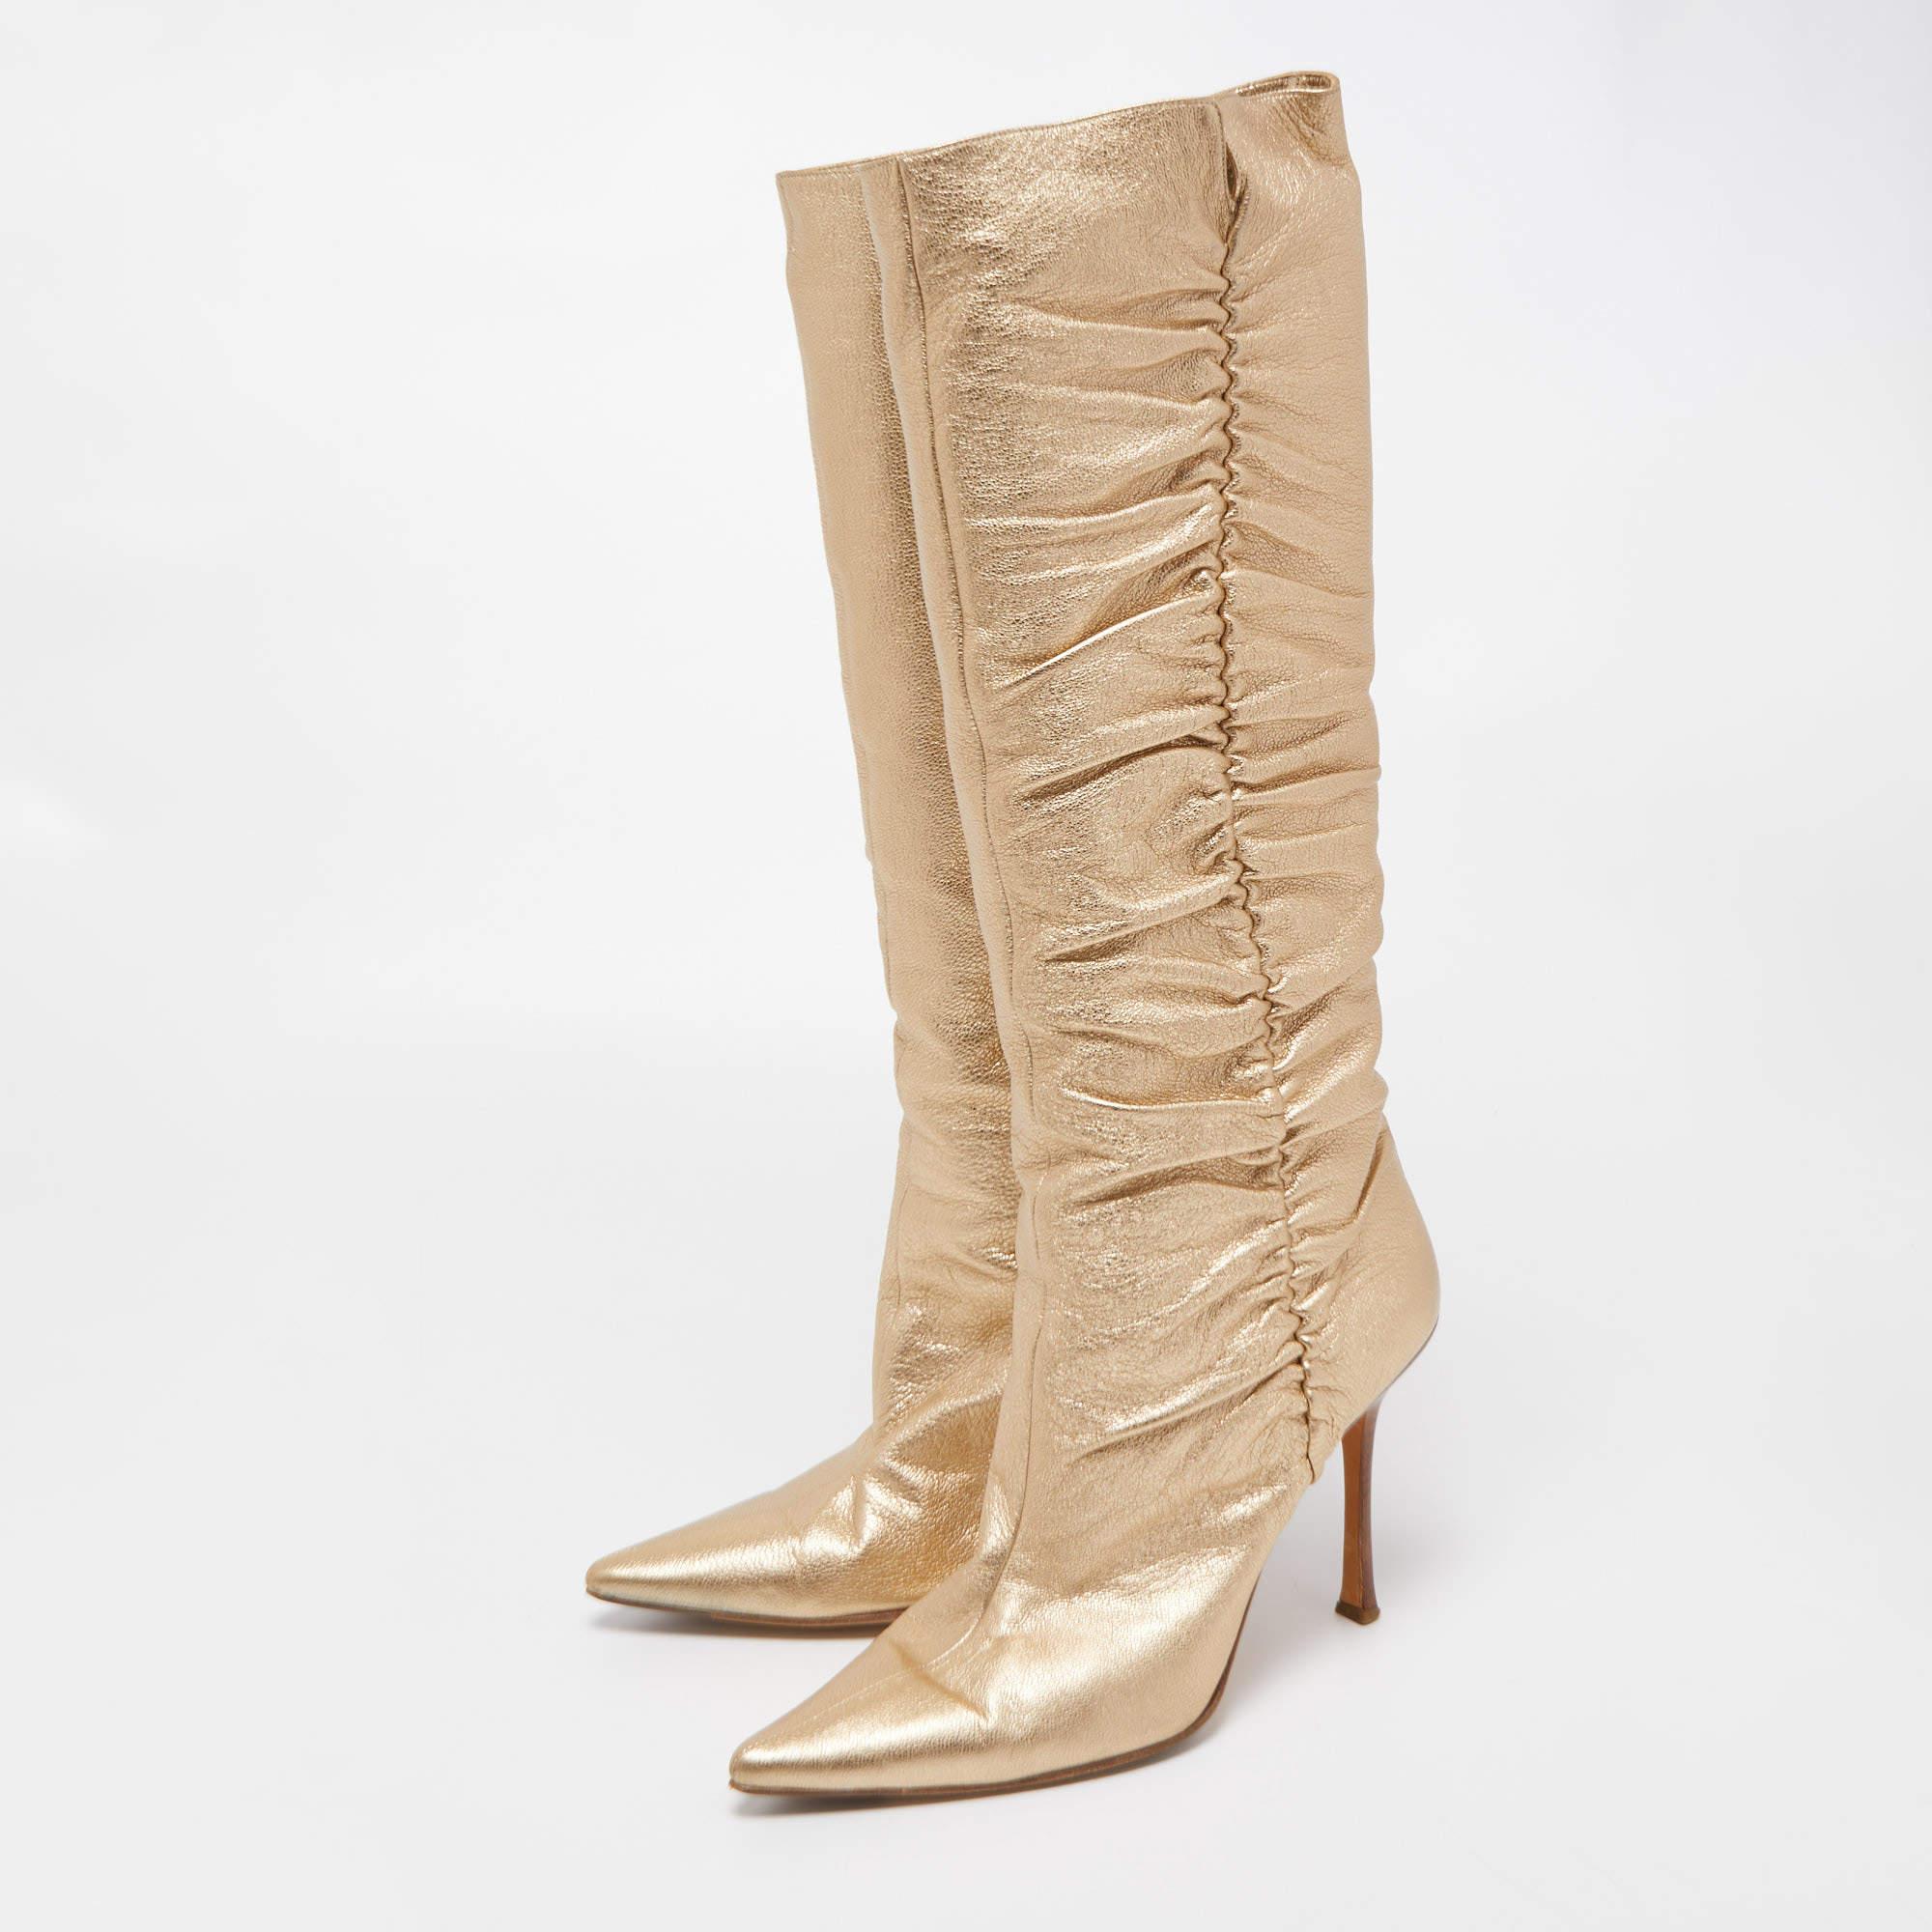 Jimmy Choo Metallic Gold Leather Knee Length Boots Size 41 For Sale 3